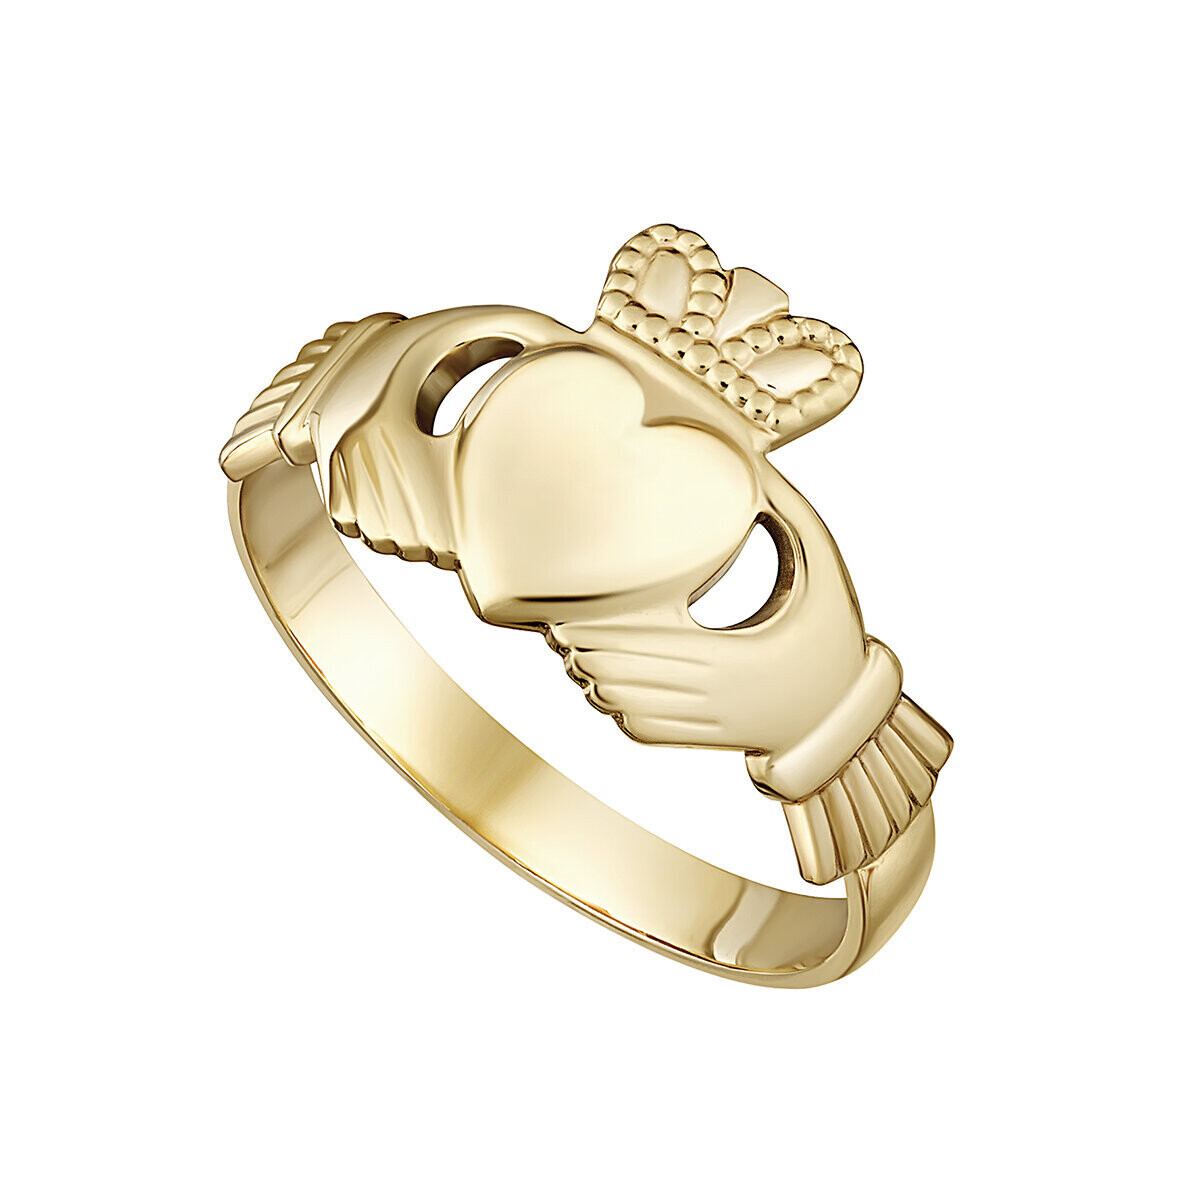 Ladies 10kt Gold Claddagh Ring- Our Standard Ladies Claddagh Ring